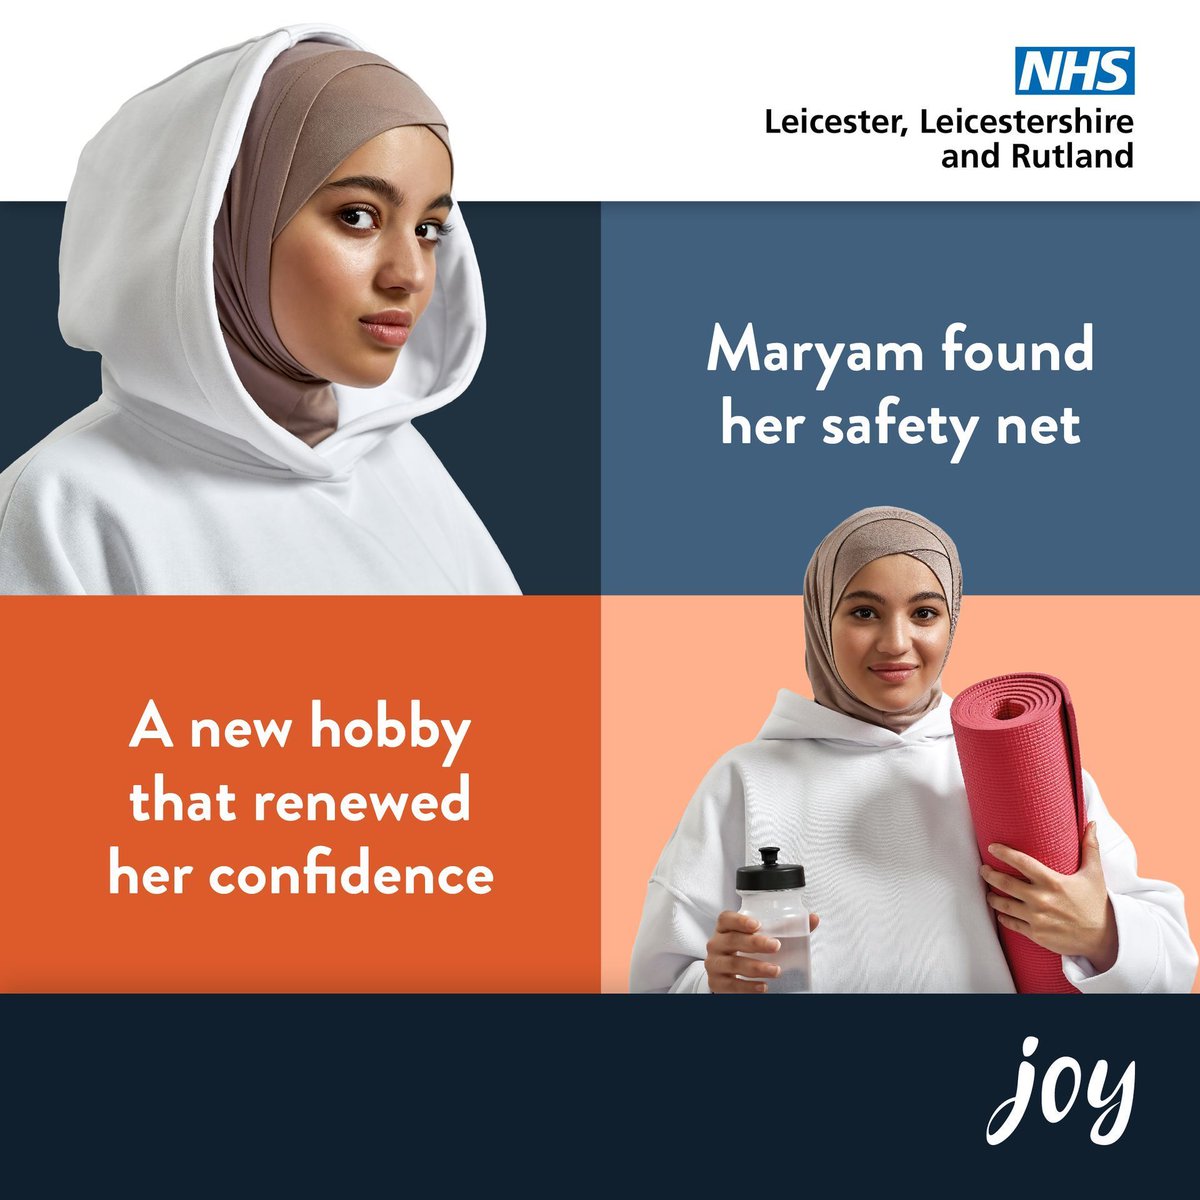 Joy is a new website which helps you find activities, groups and support near you. From talking therapies to local breastfeeding groups there’s a range of information for you and your family. Just enter your postcode and start searching. Visit: LLRjoy.com #MMHAW